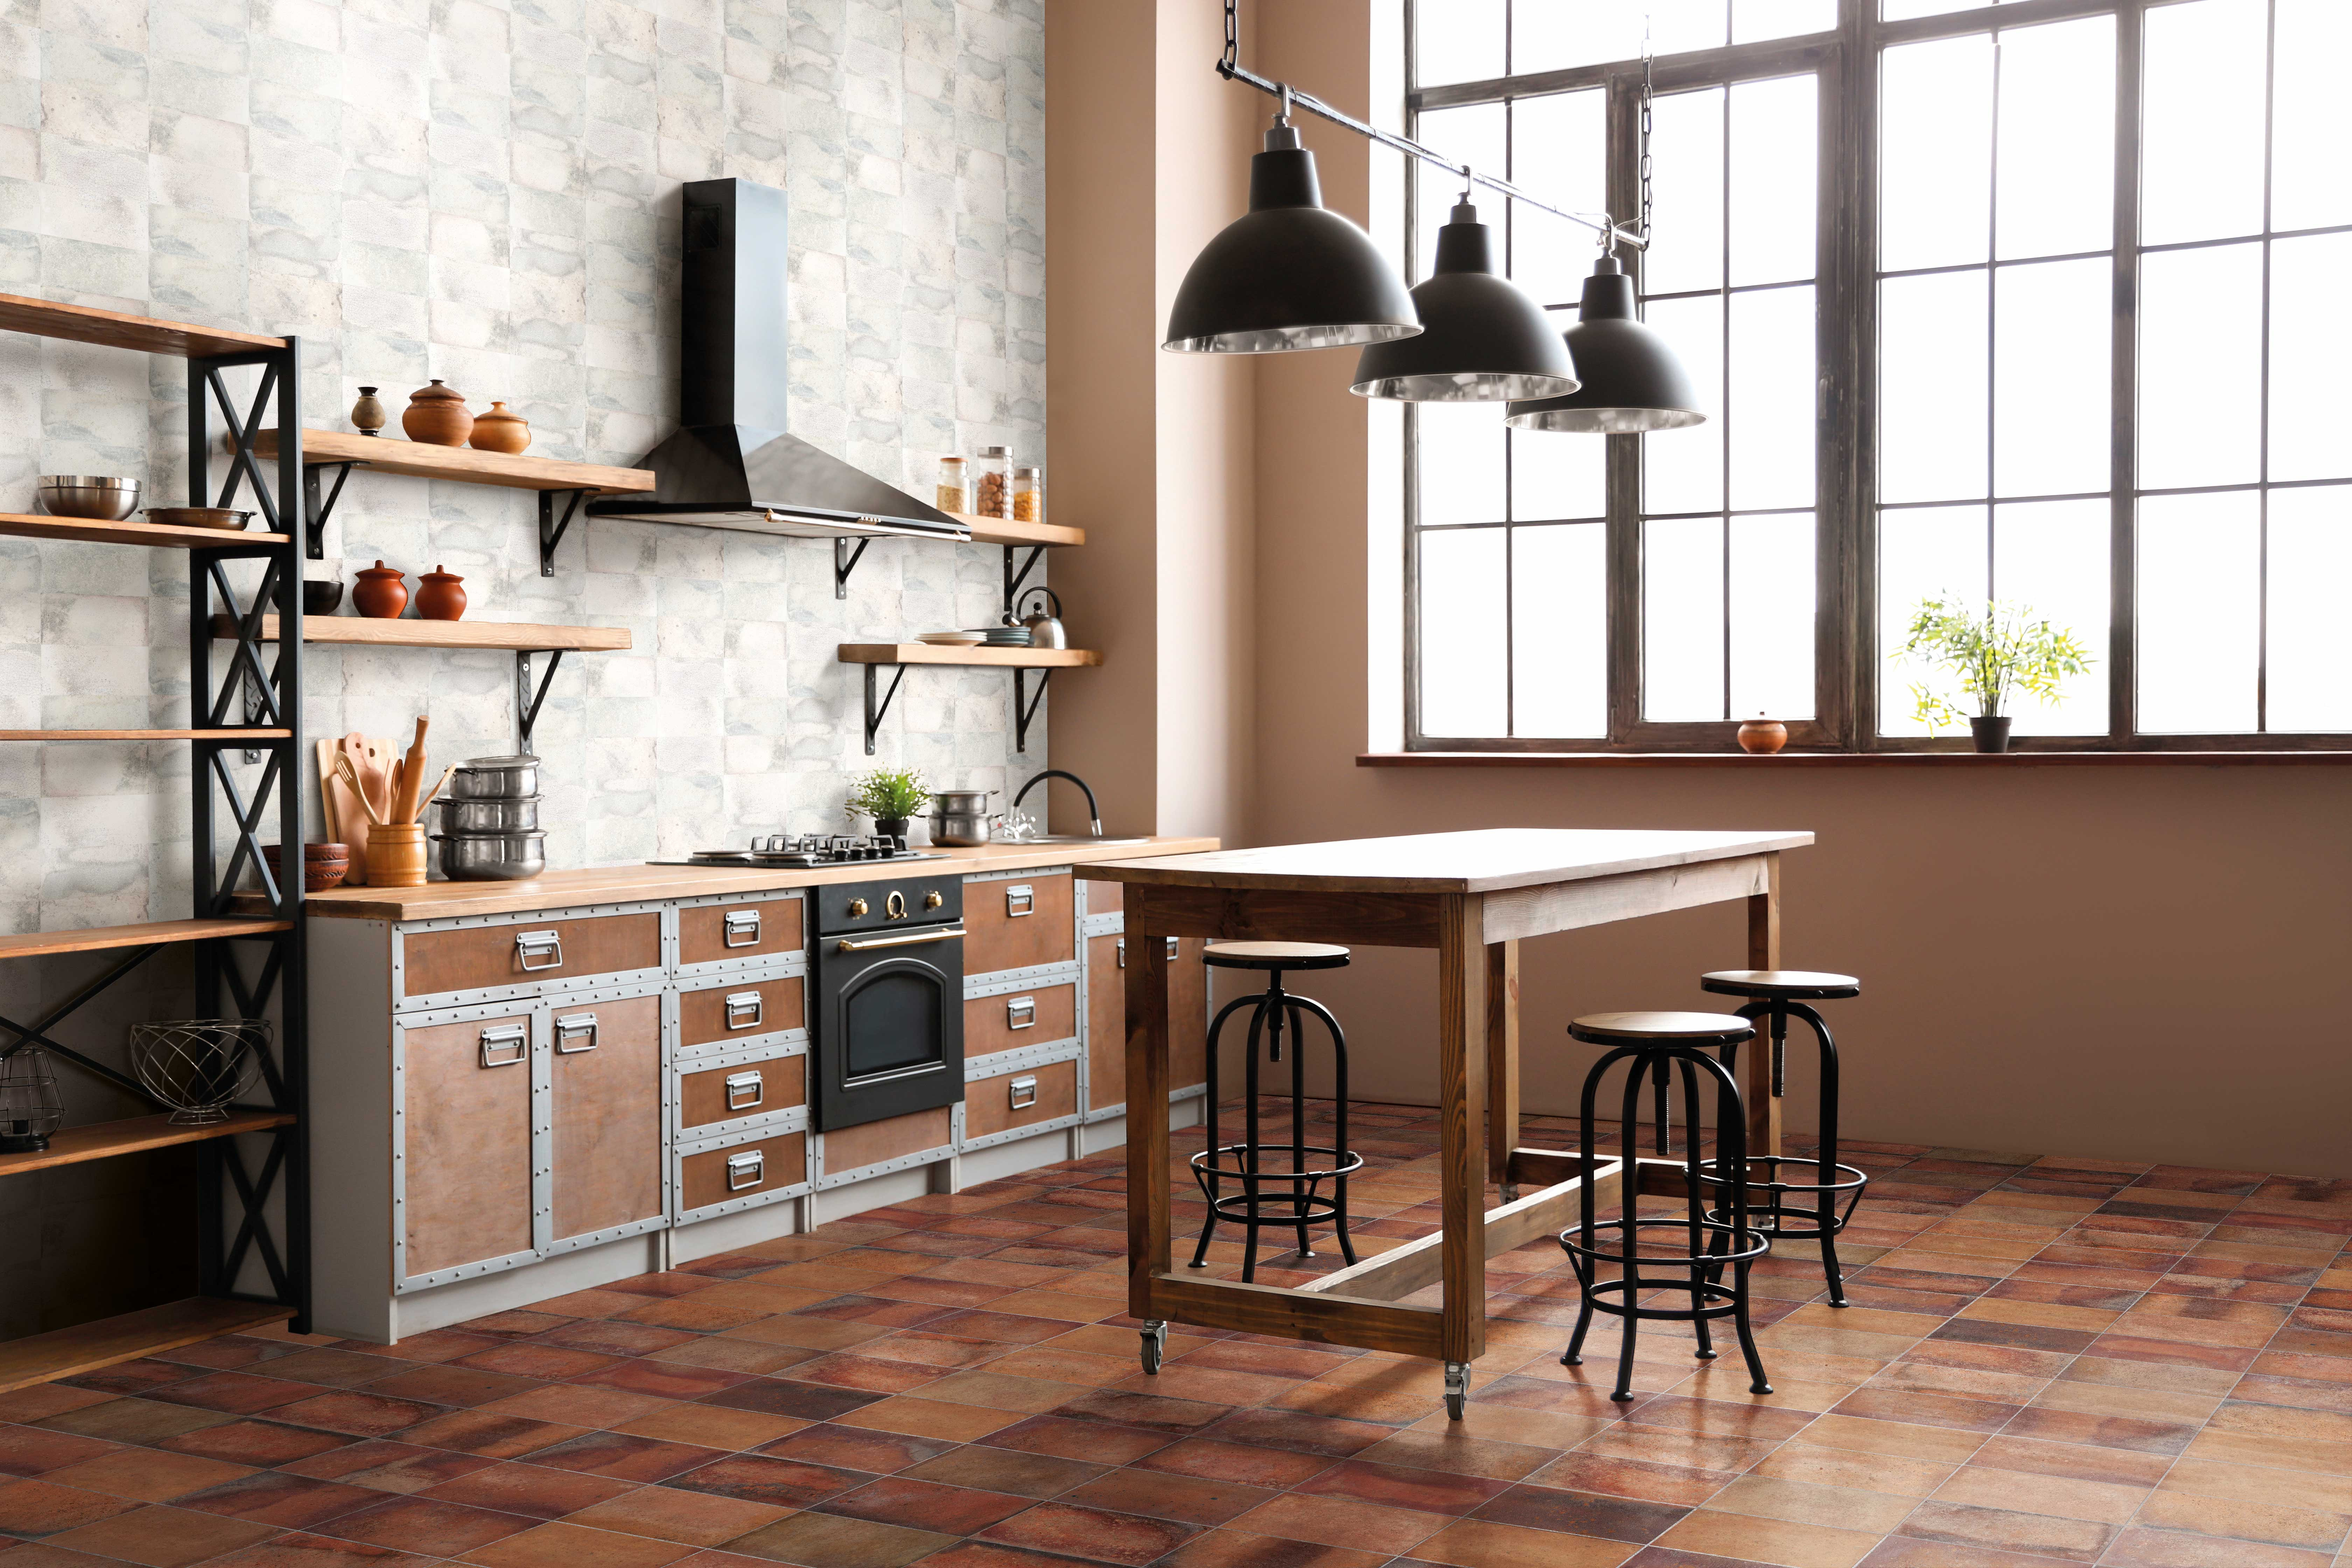 Our beautiful Atelier terracotta collection | nanda tiles 1212